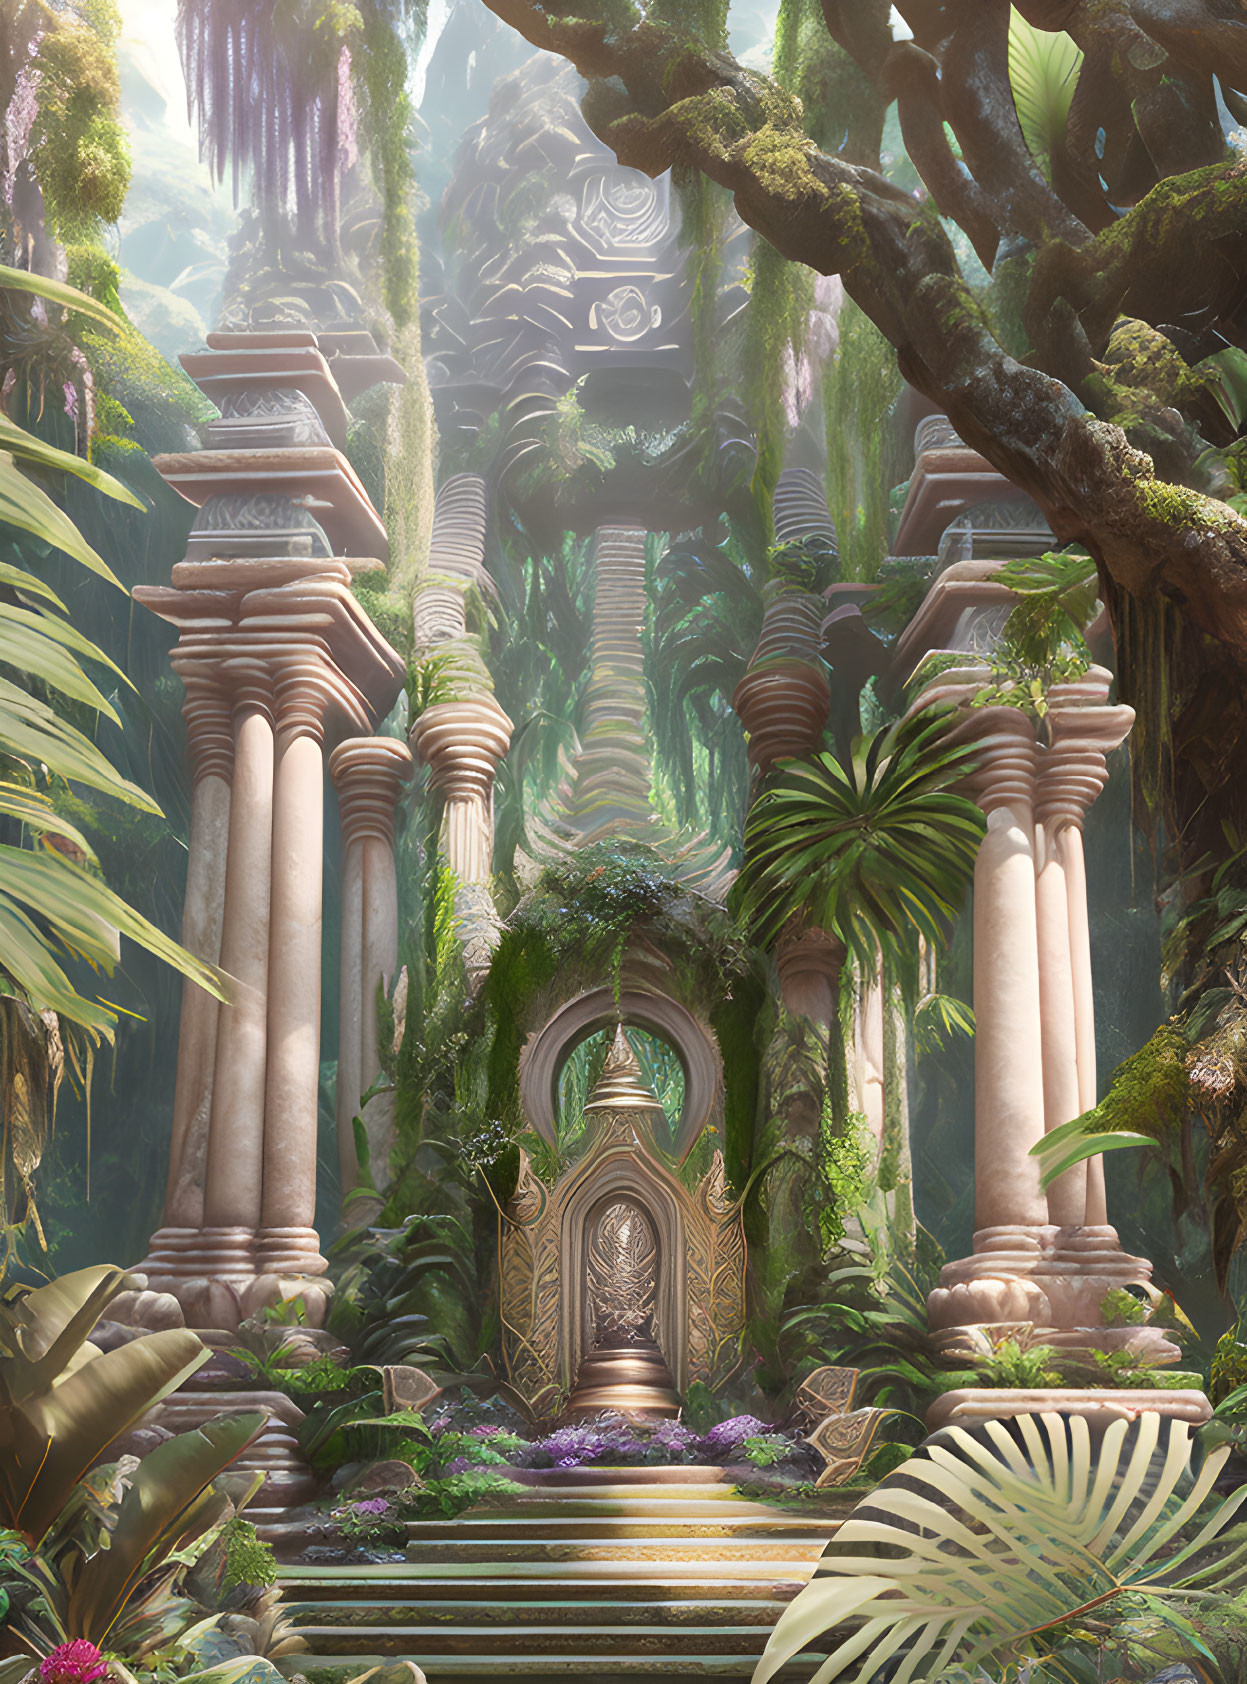 Overgrown ancient jungle temple with mystical columns